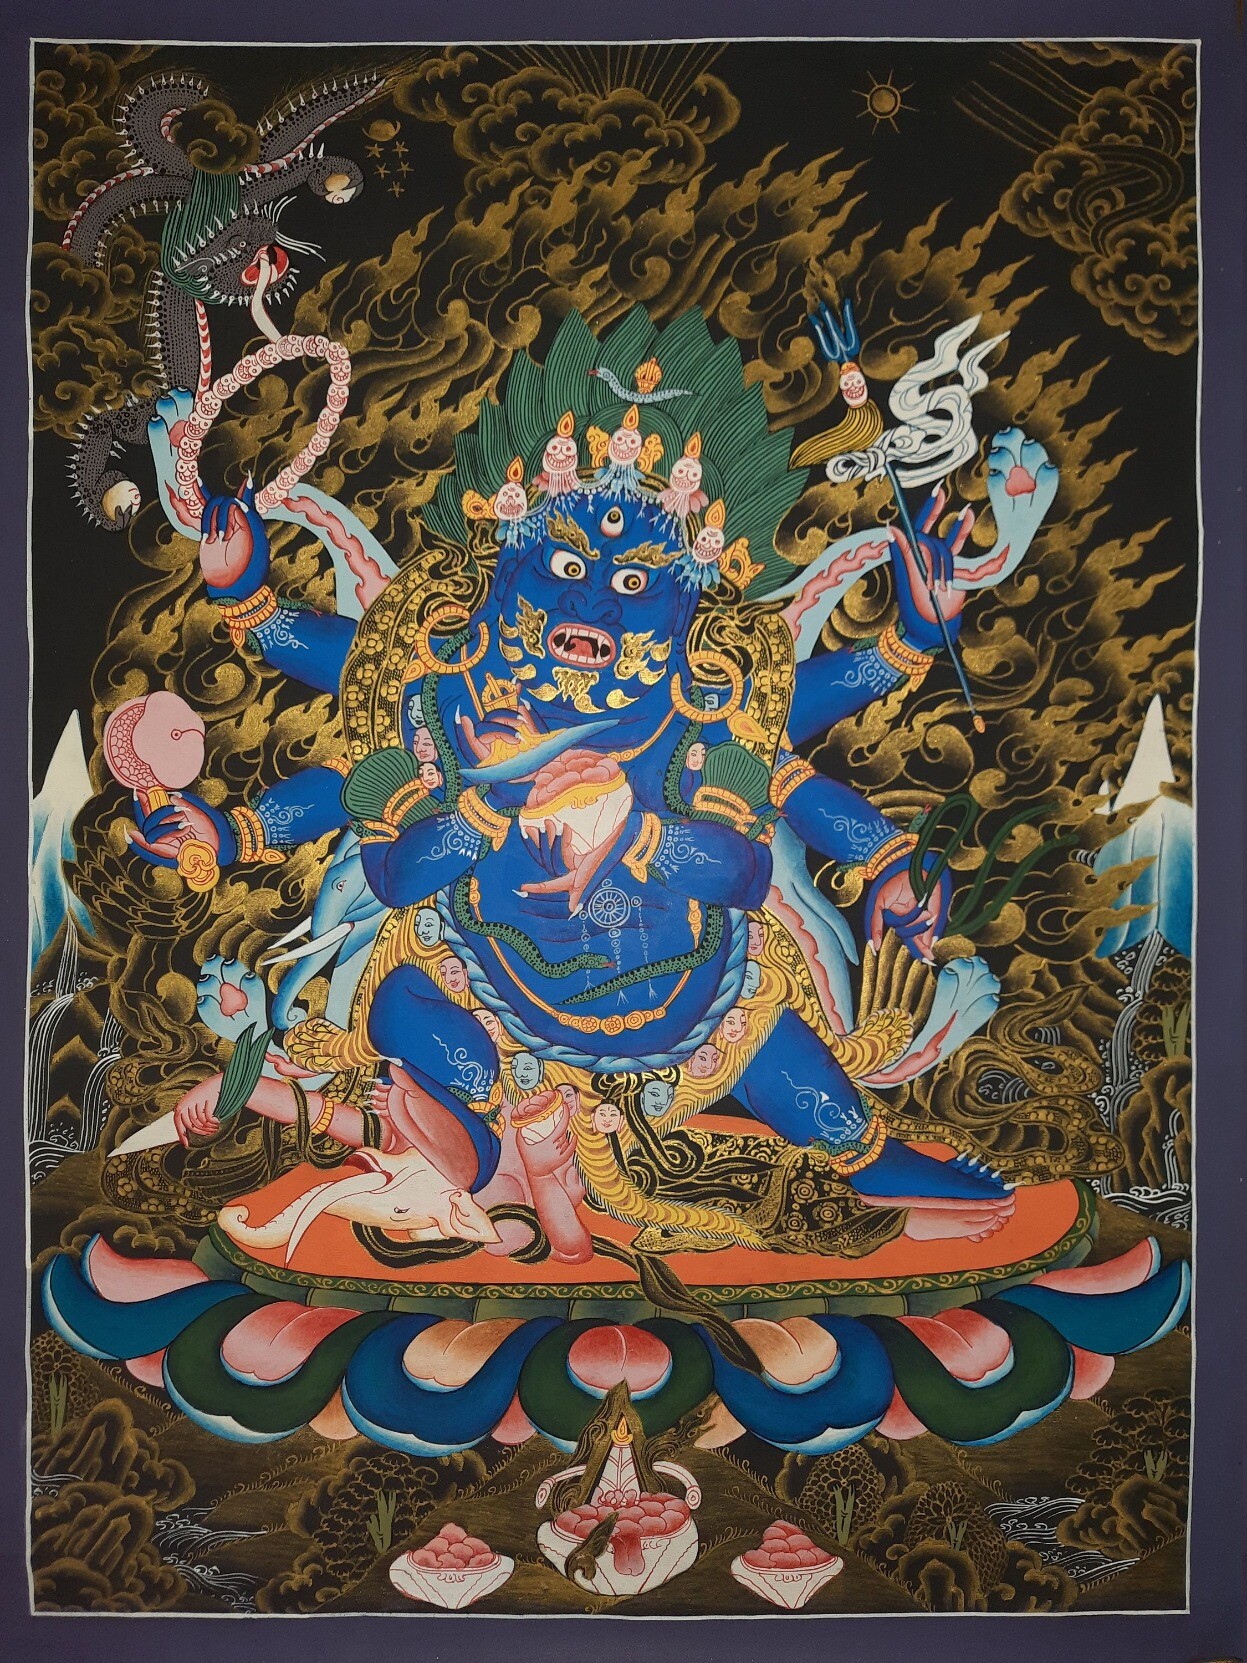 mahkala deity Tibetan The deity is depicted in the iconography with three eyes over his face with one on his forehead, which represents the past, present, and future, showing the comprehension of time. The five skulls that make up the crown on his head <br />stand in for the five deadly delusions of anger, want, ignorance, envy, and pride. In the end, these illusions become the pearls of wisdom of the five Buddha families.